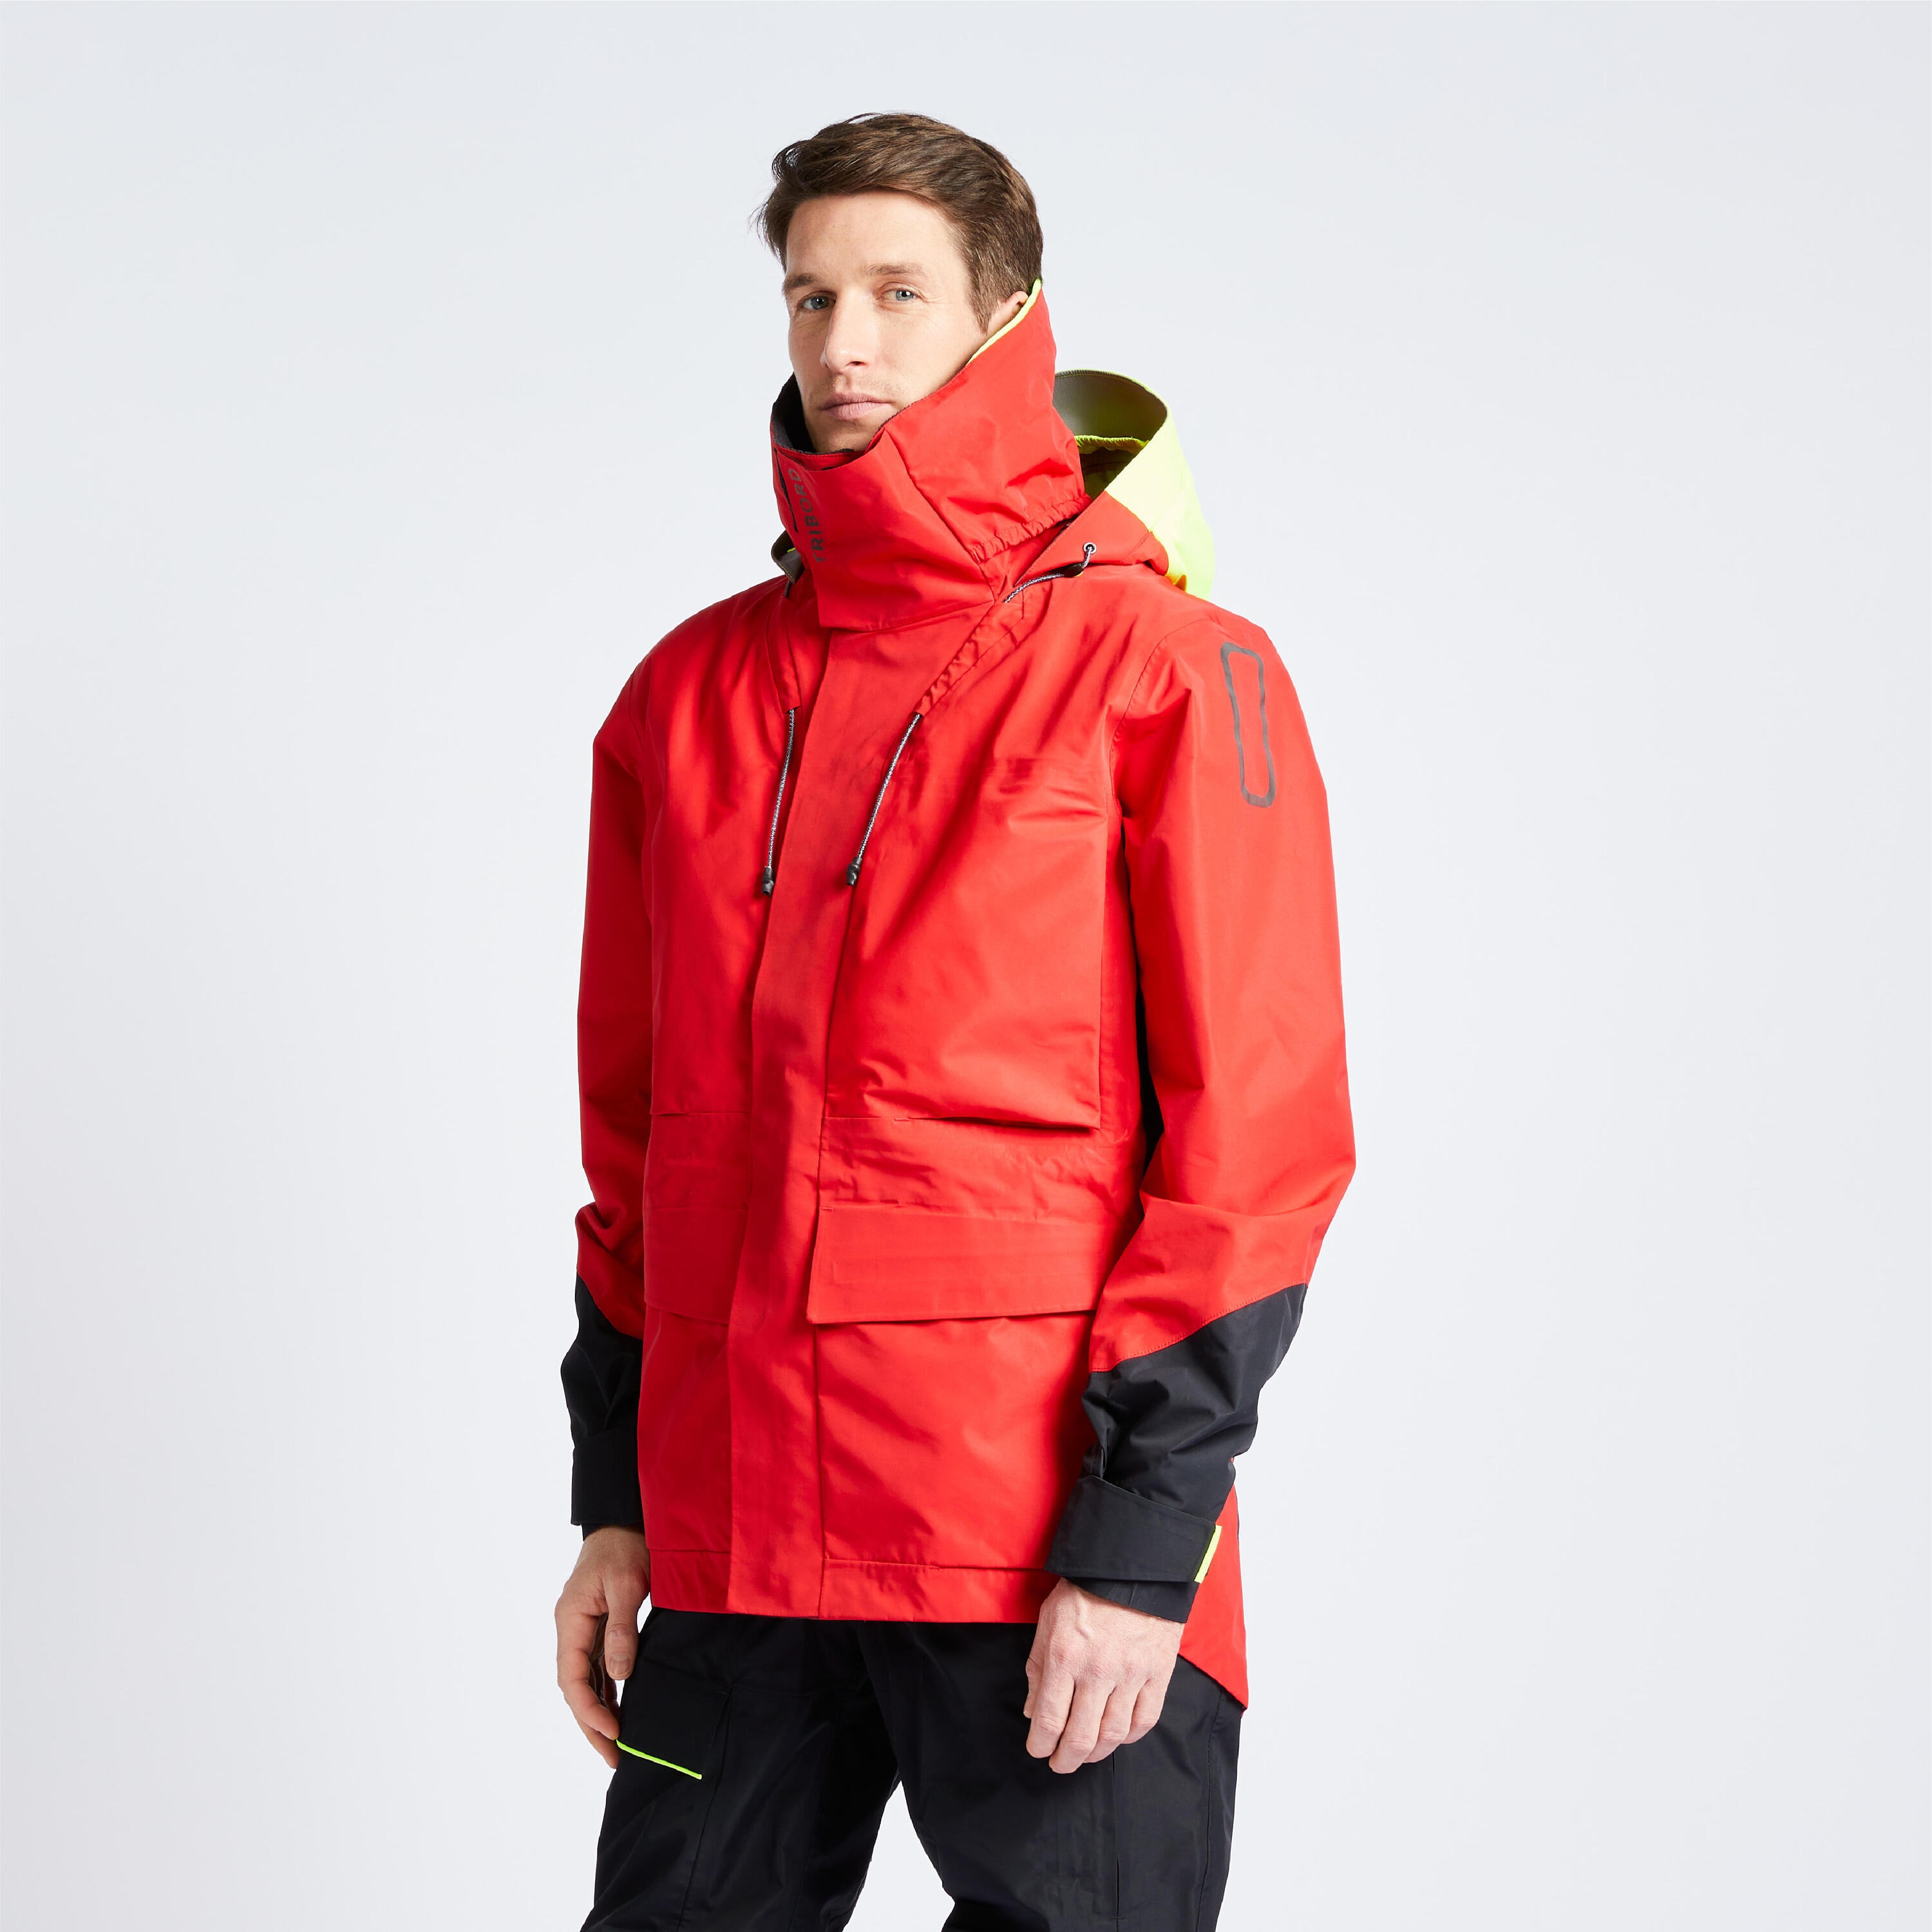 Men’s Sailing jacket Offshore 900 - Red 2/12